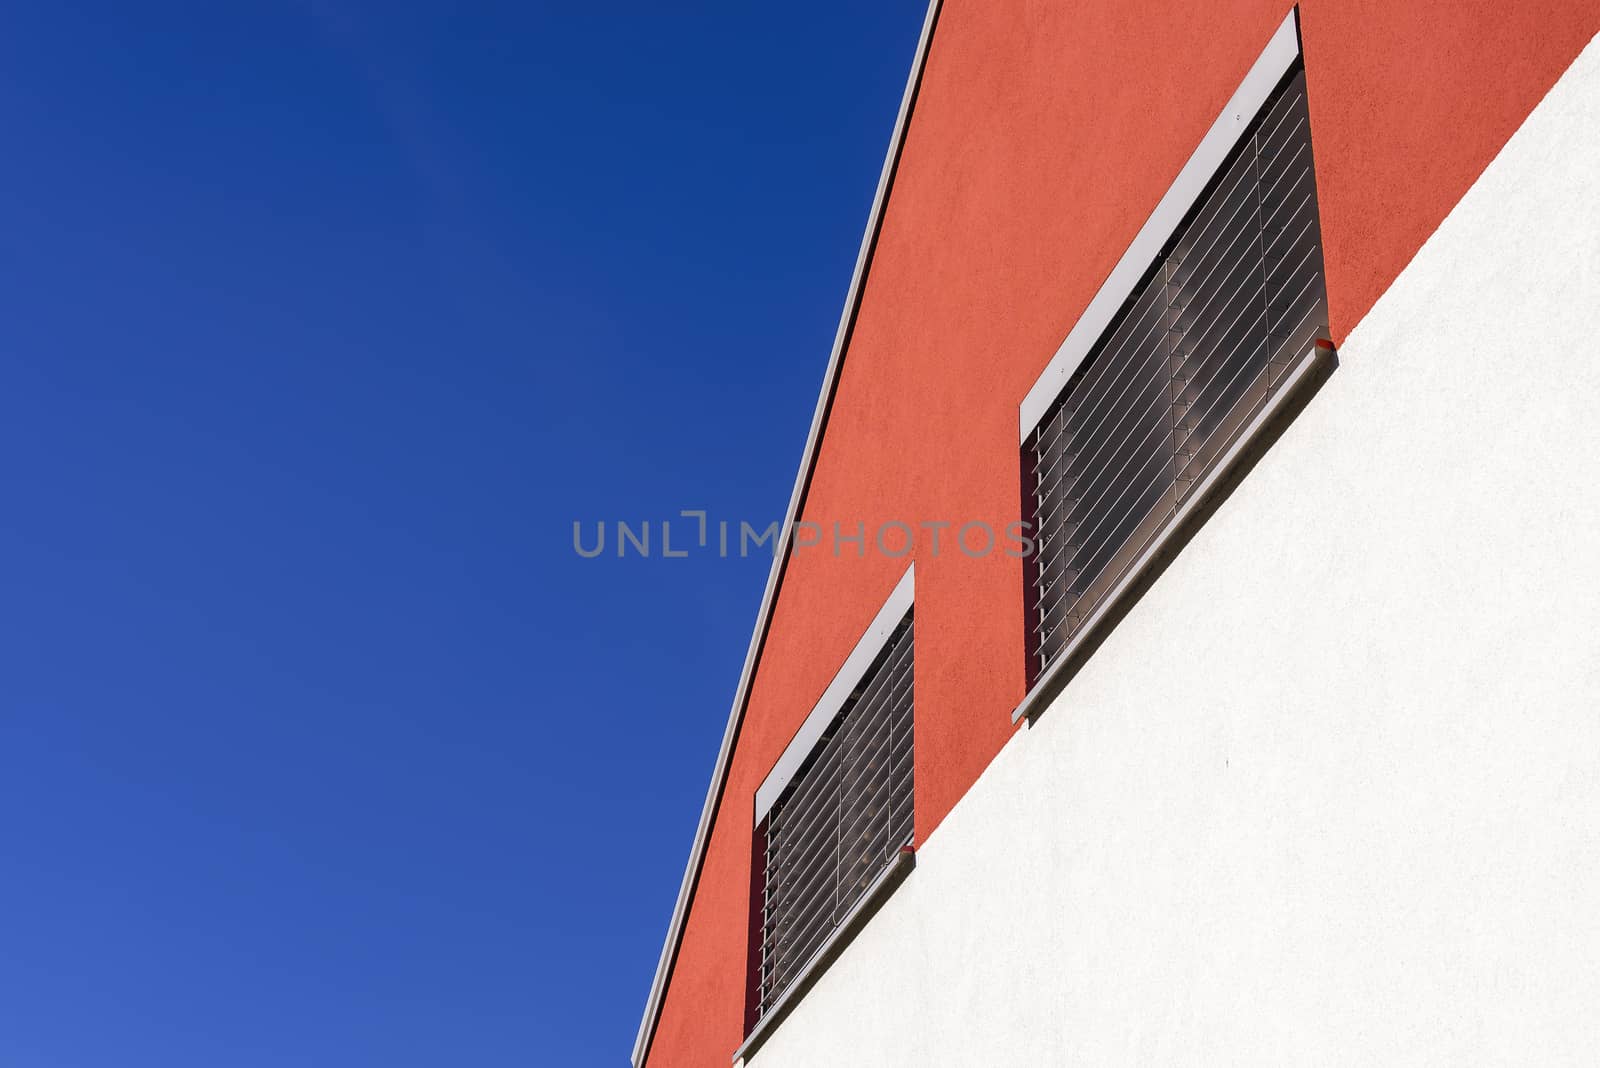 Orange white facade with silver alluminium blinds and blue sky by asafaric